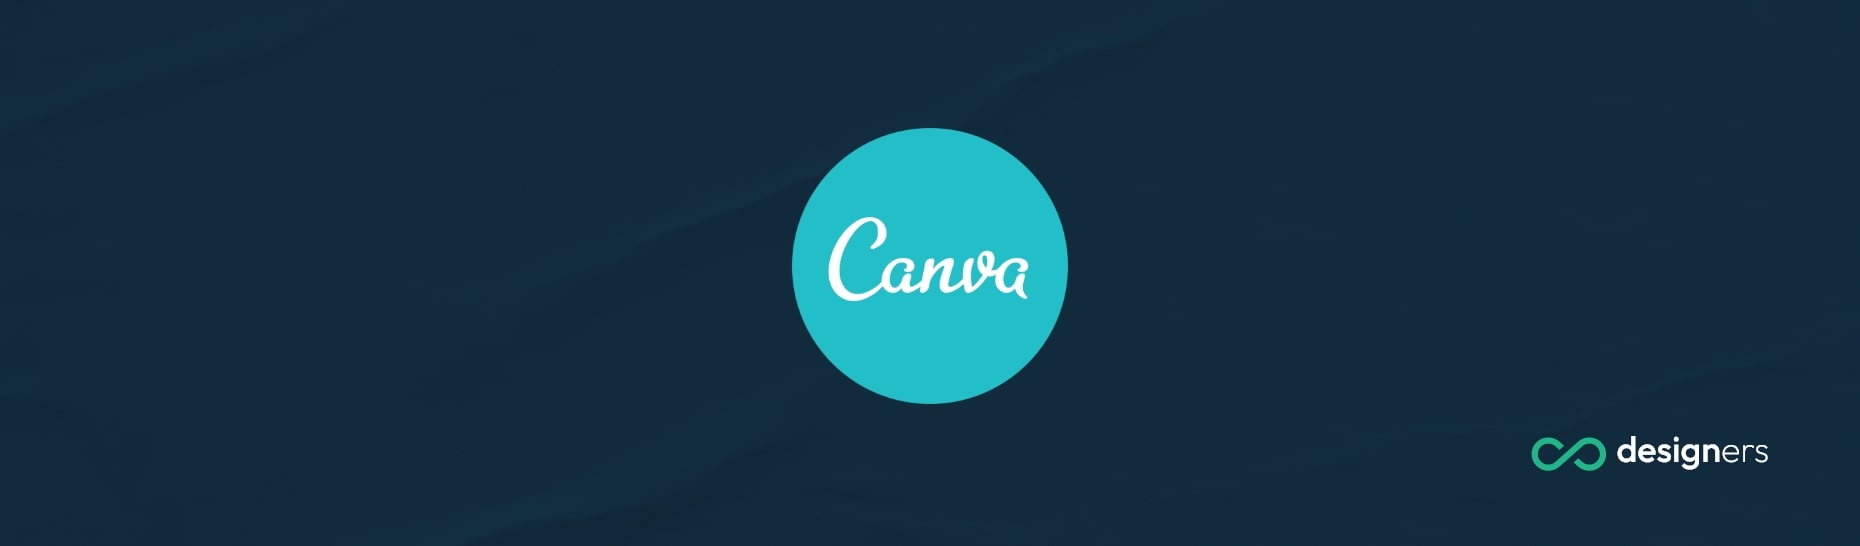 Can Canva Create Vector Files?